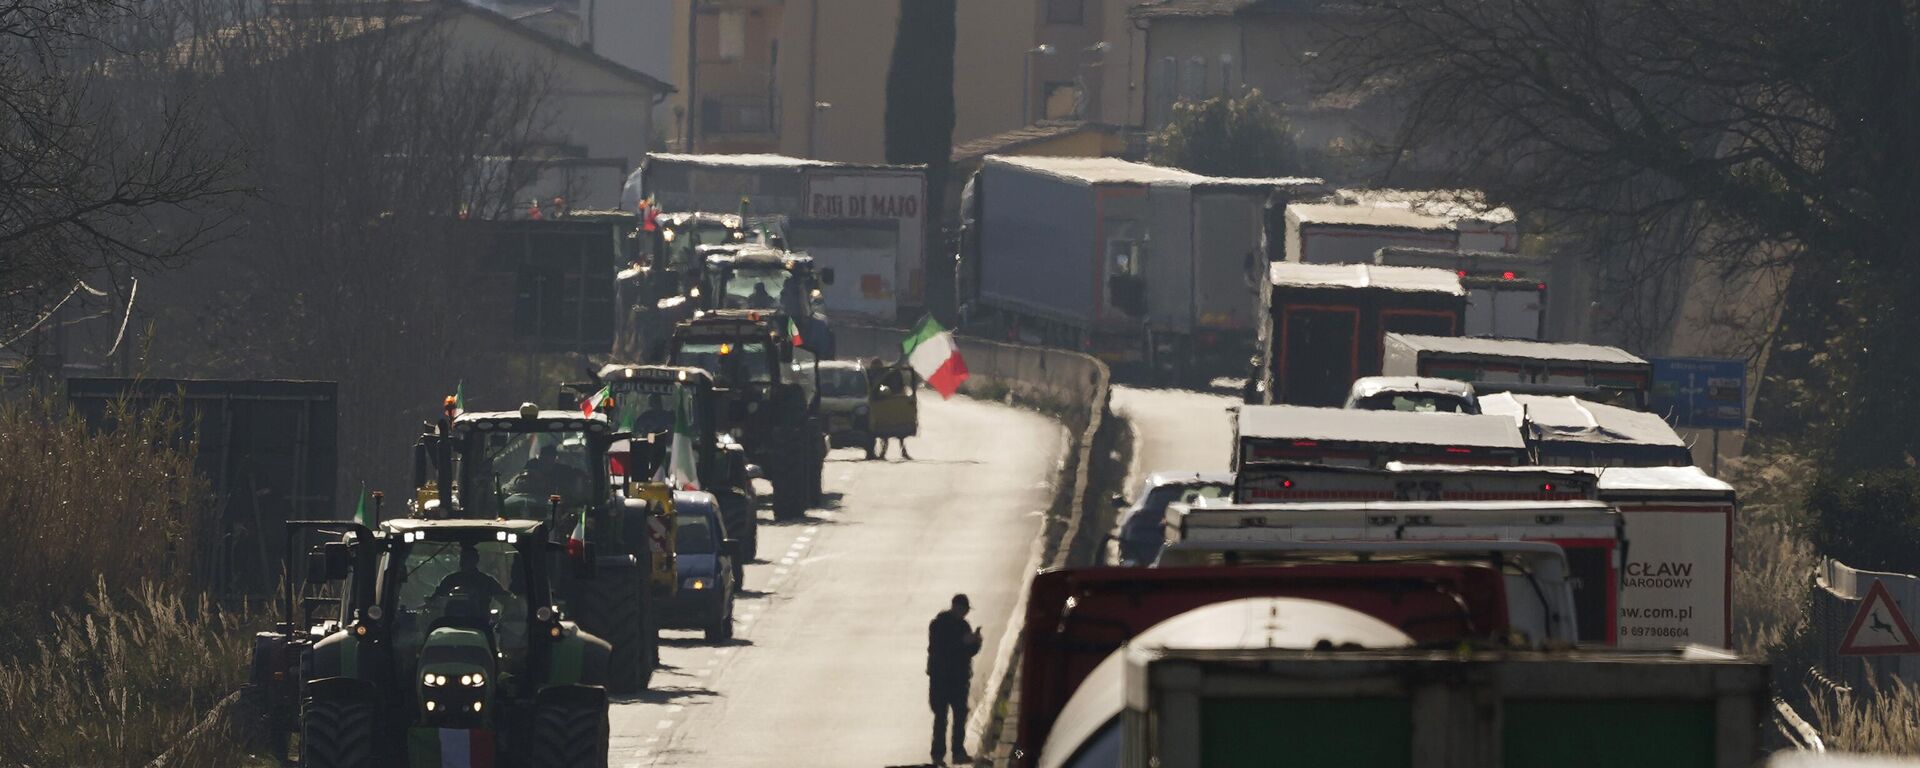 Farmers run with their tractors on the high speed road in Orte, Italy, Wednesday, Jan. 31, 2024. Farmers have been protesting in various parts of Italy and Europe against EU agriculture policies. - Sputnik International, 1920, 31.01.2024